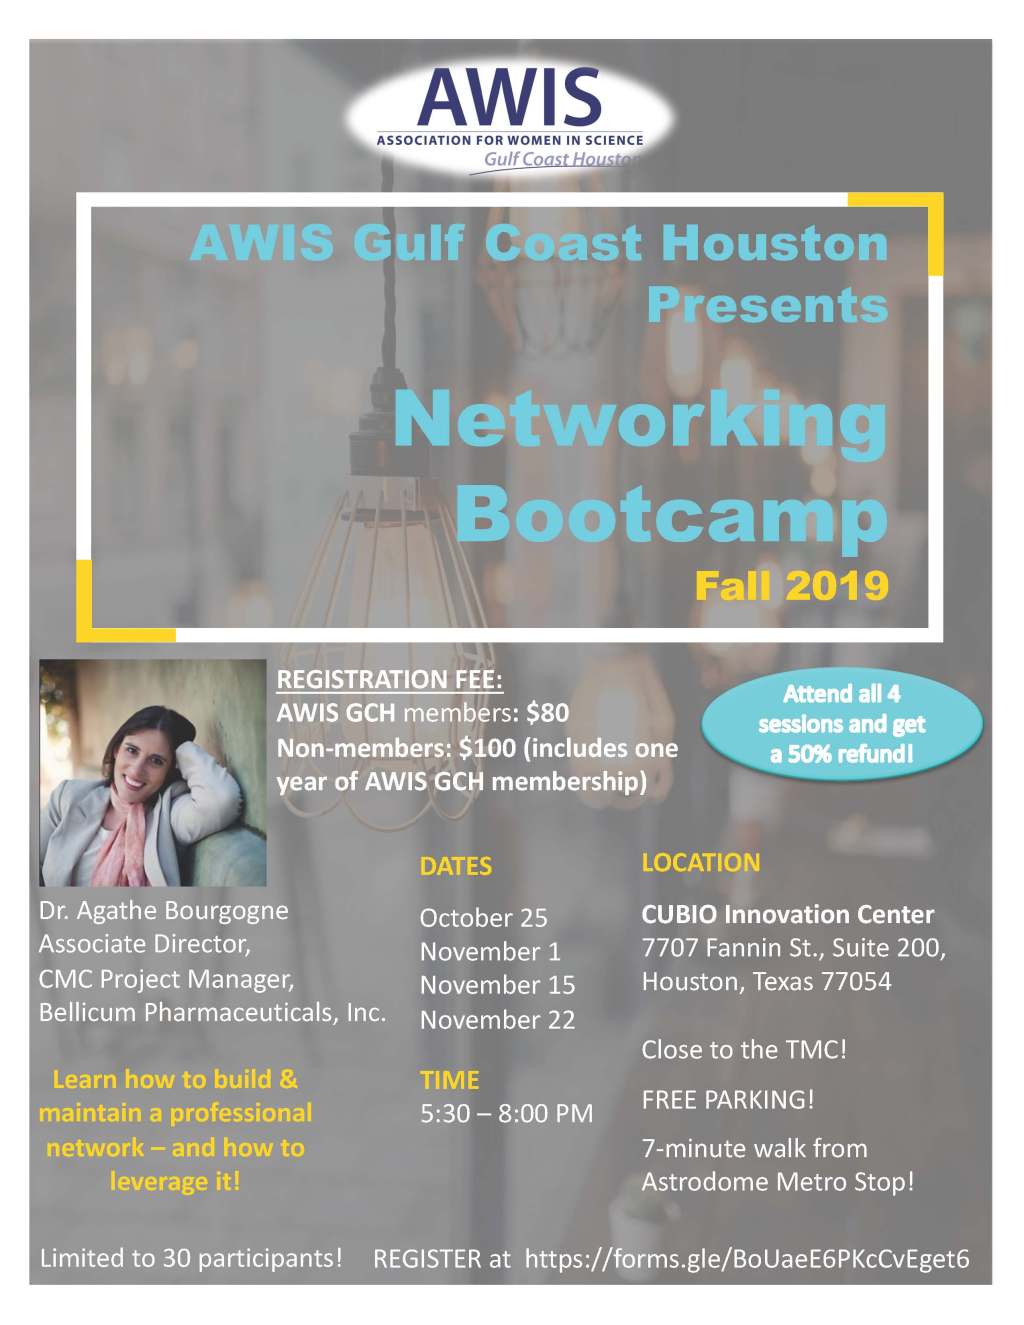 Networking Bootcamp Fall 2019